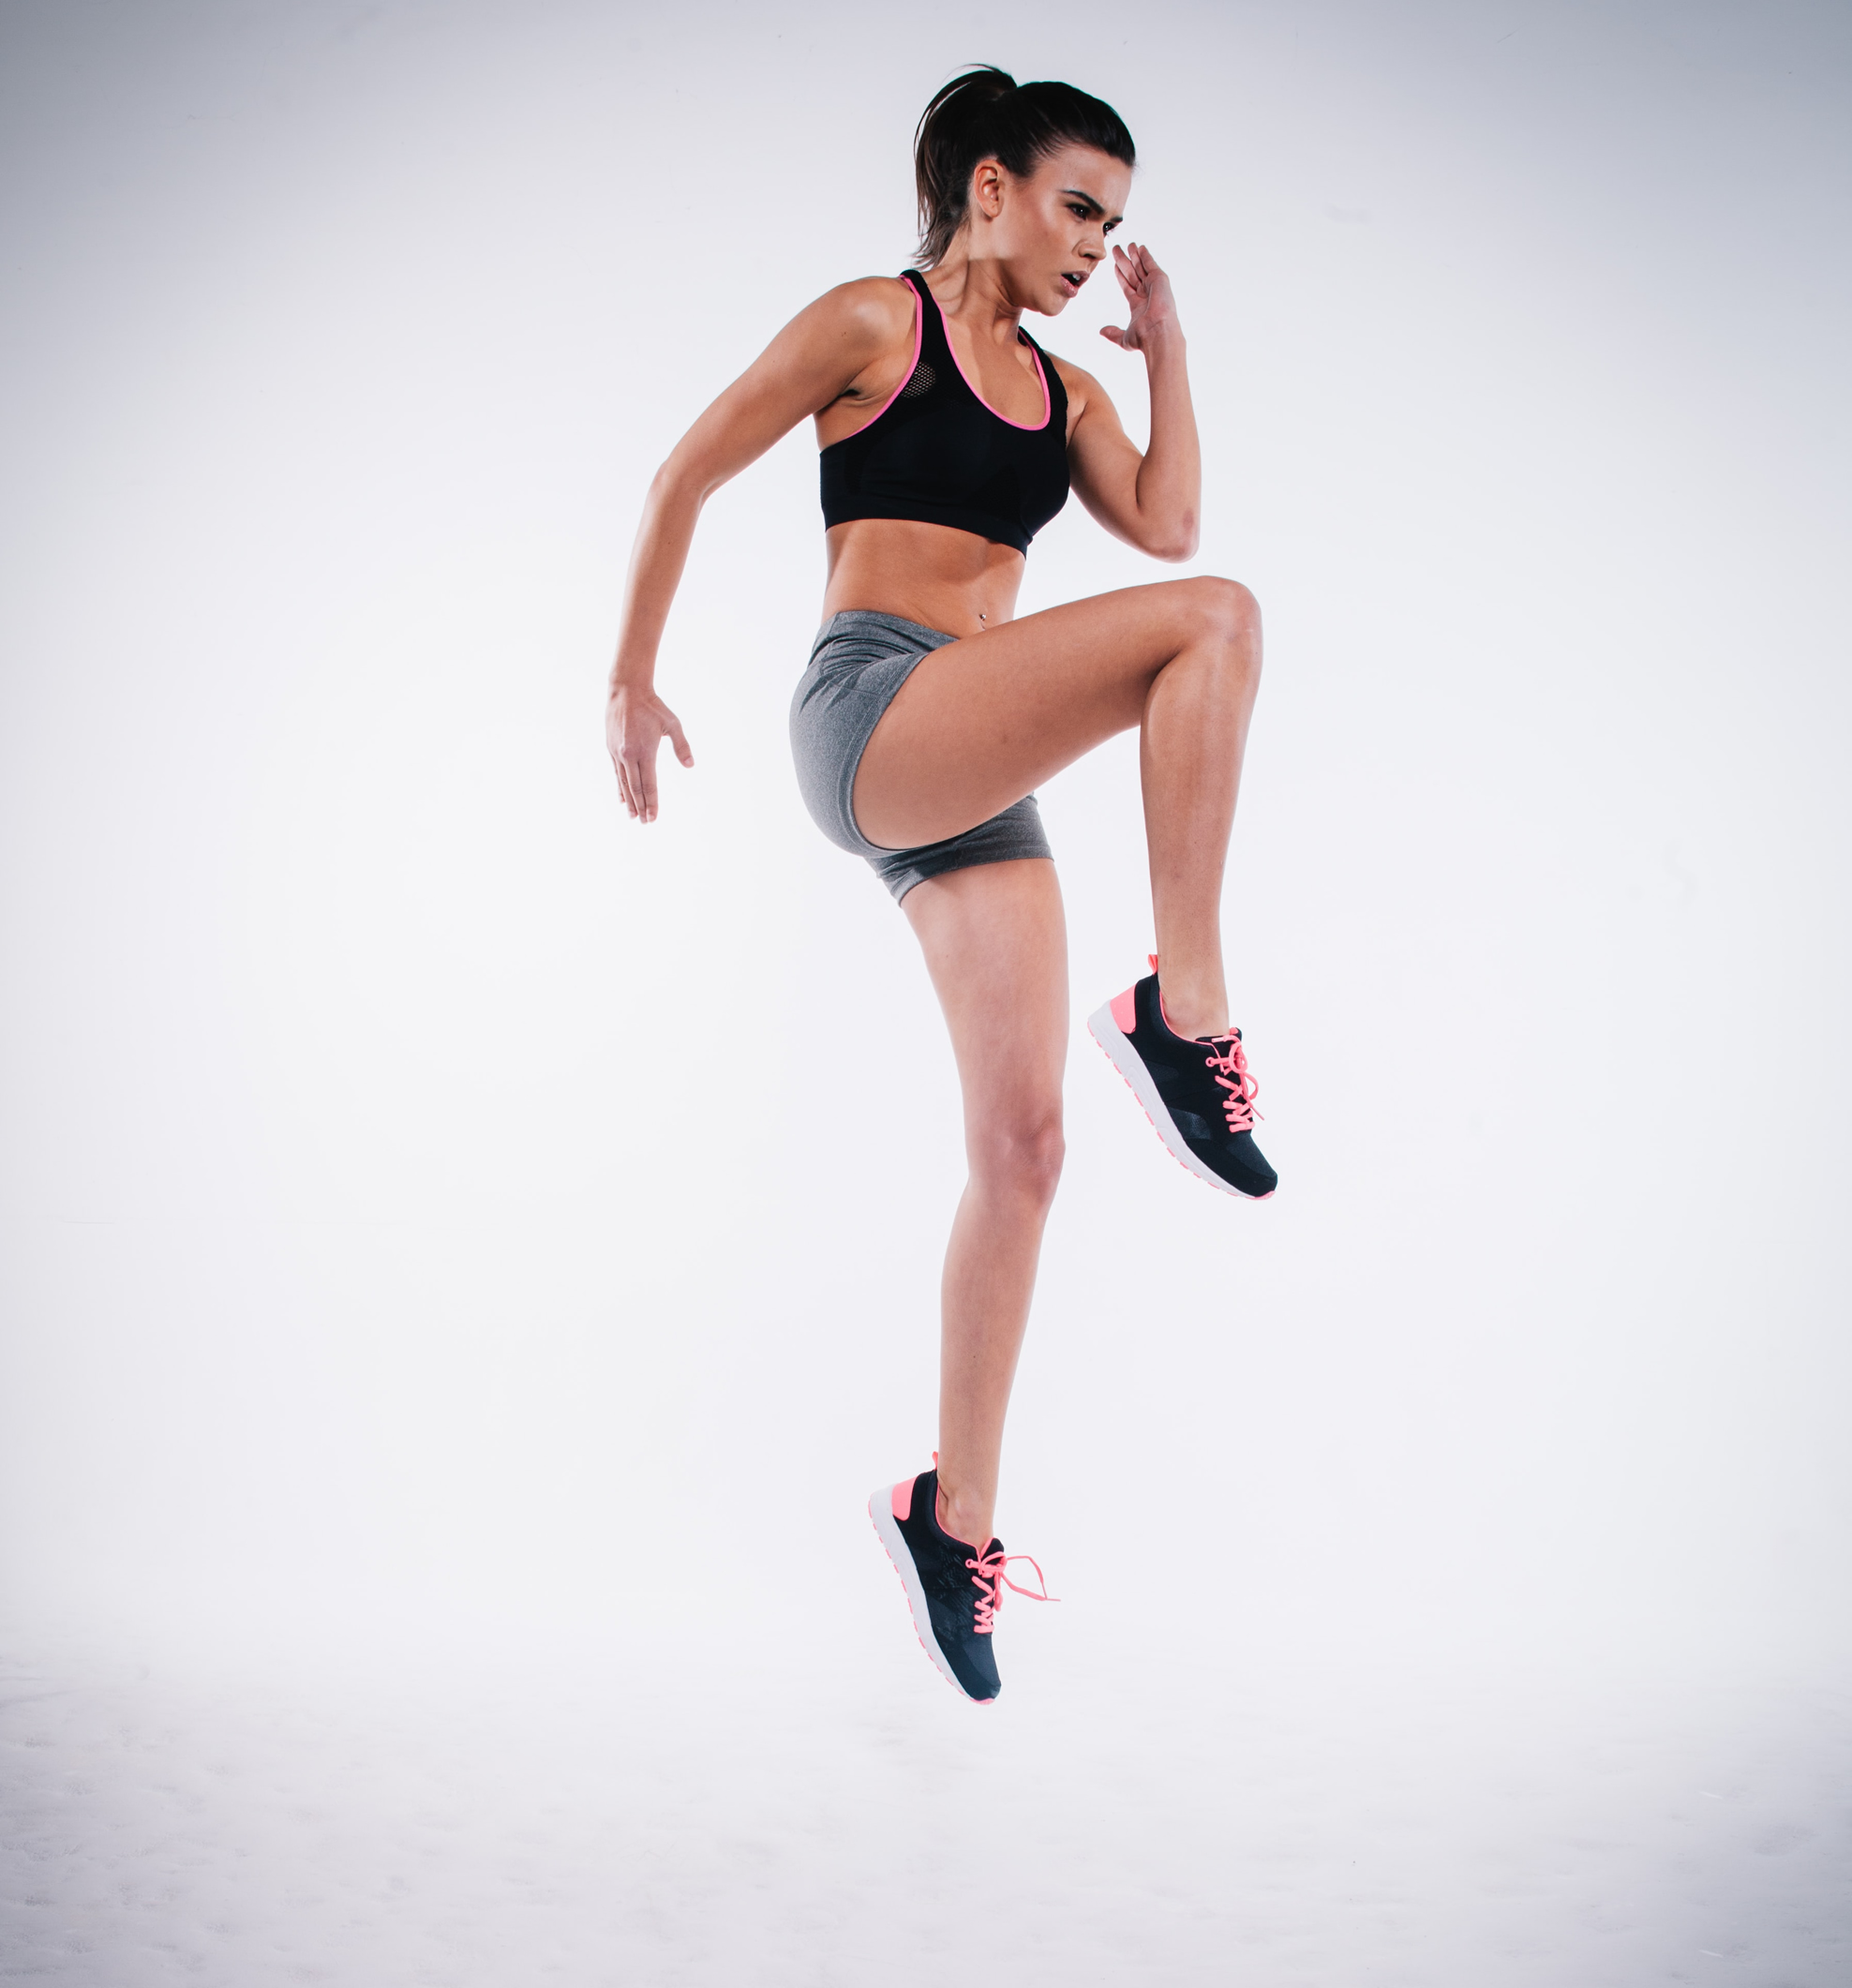 A fit woman doing power skip exercise.